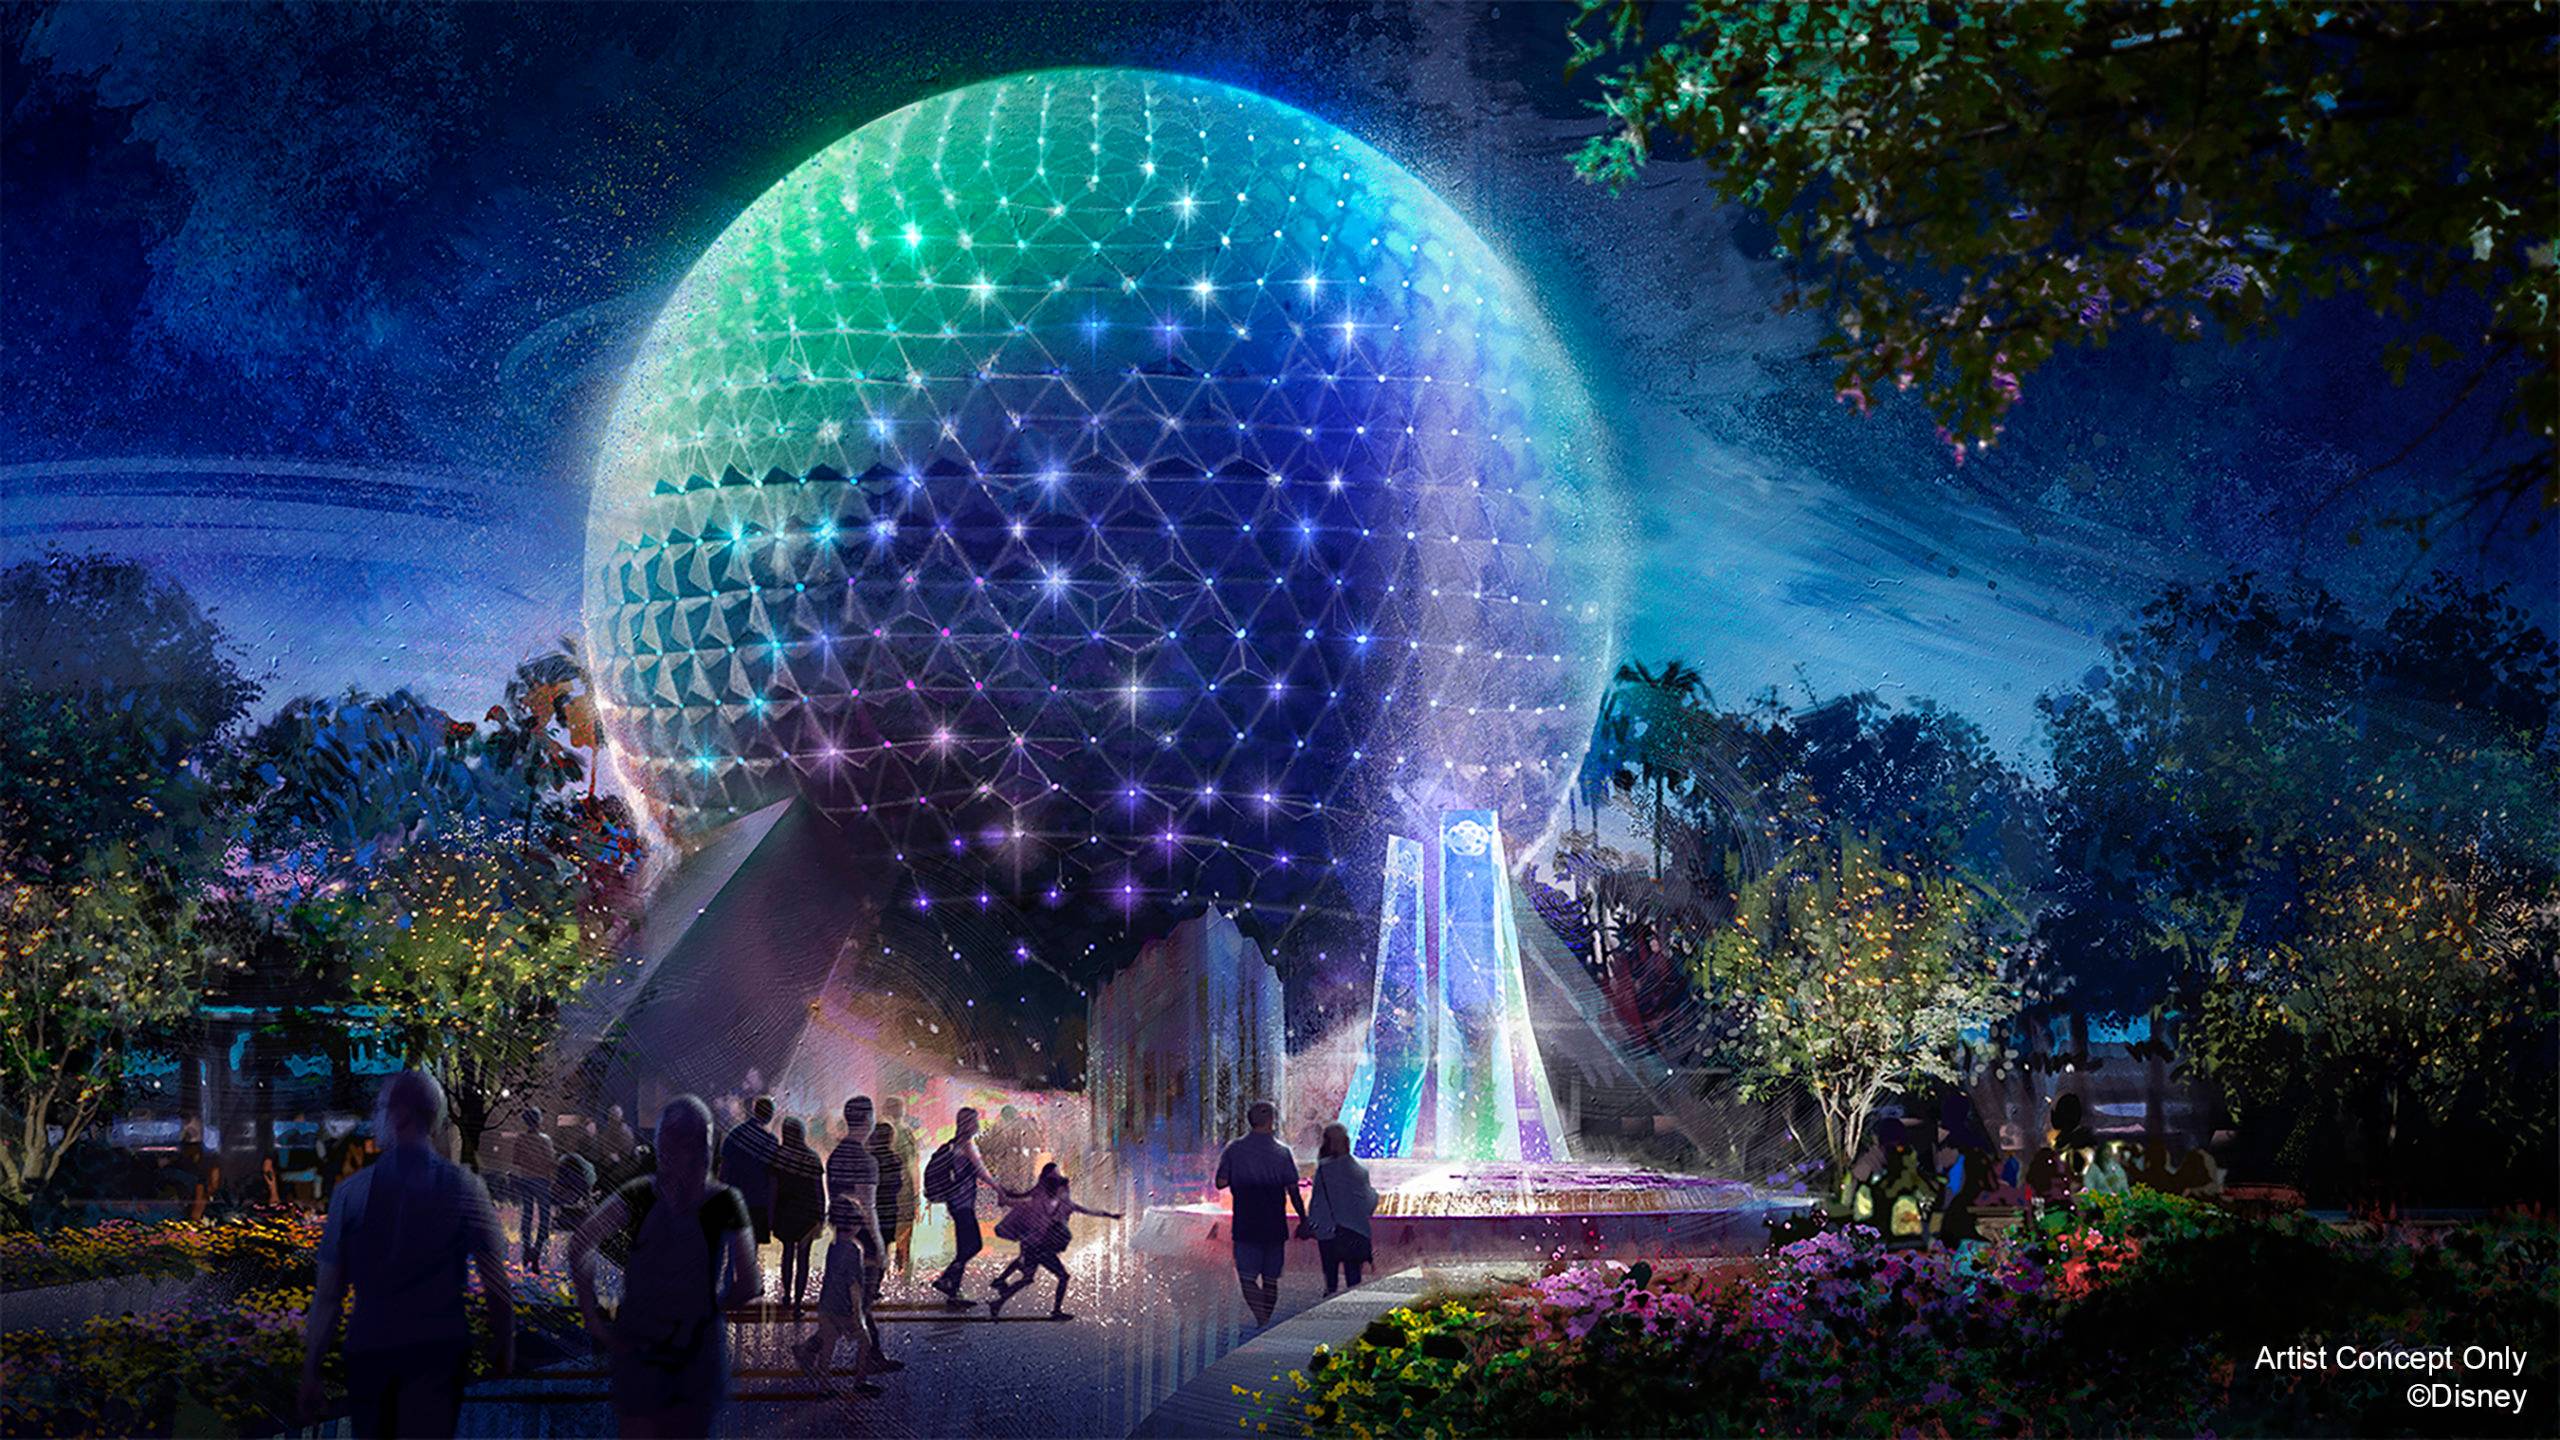 Imagineer Zach Riddley talks about the new lighting system coming to Spaceship Earth